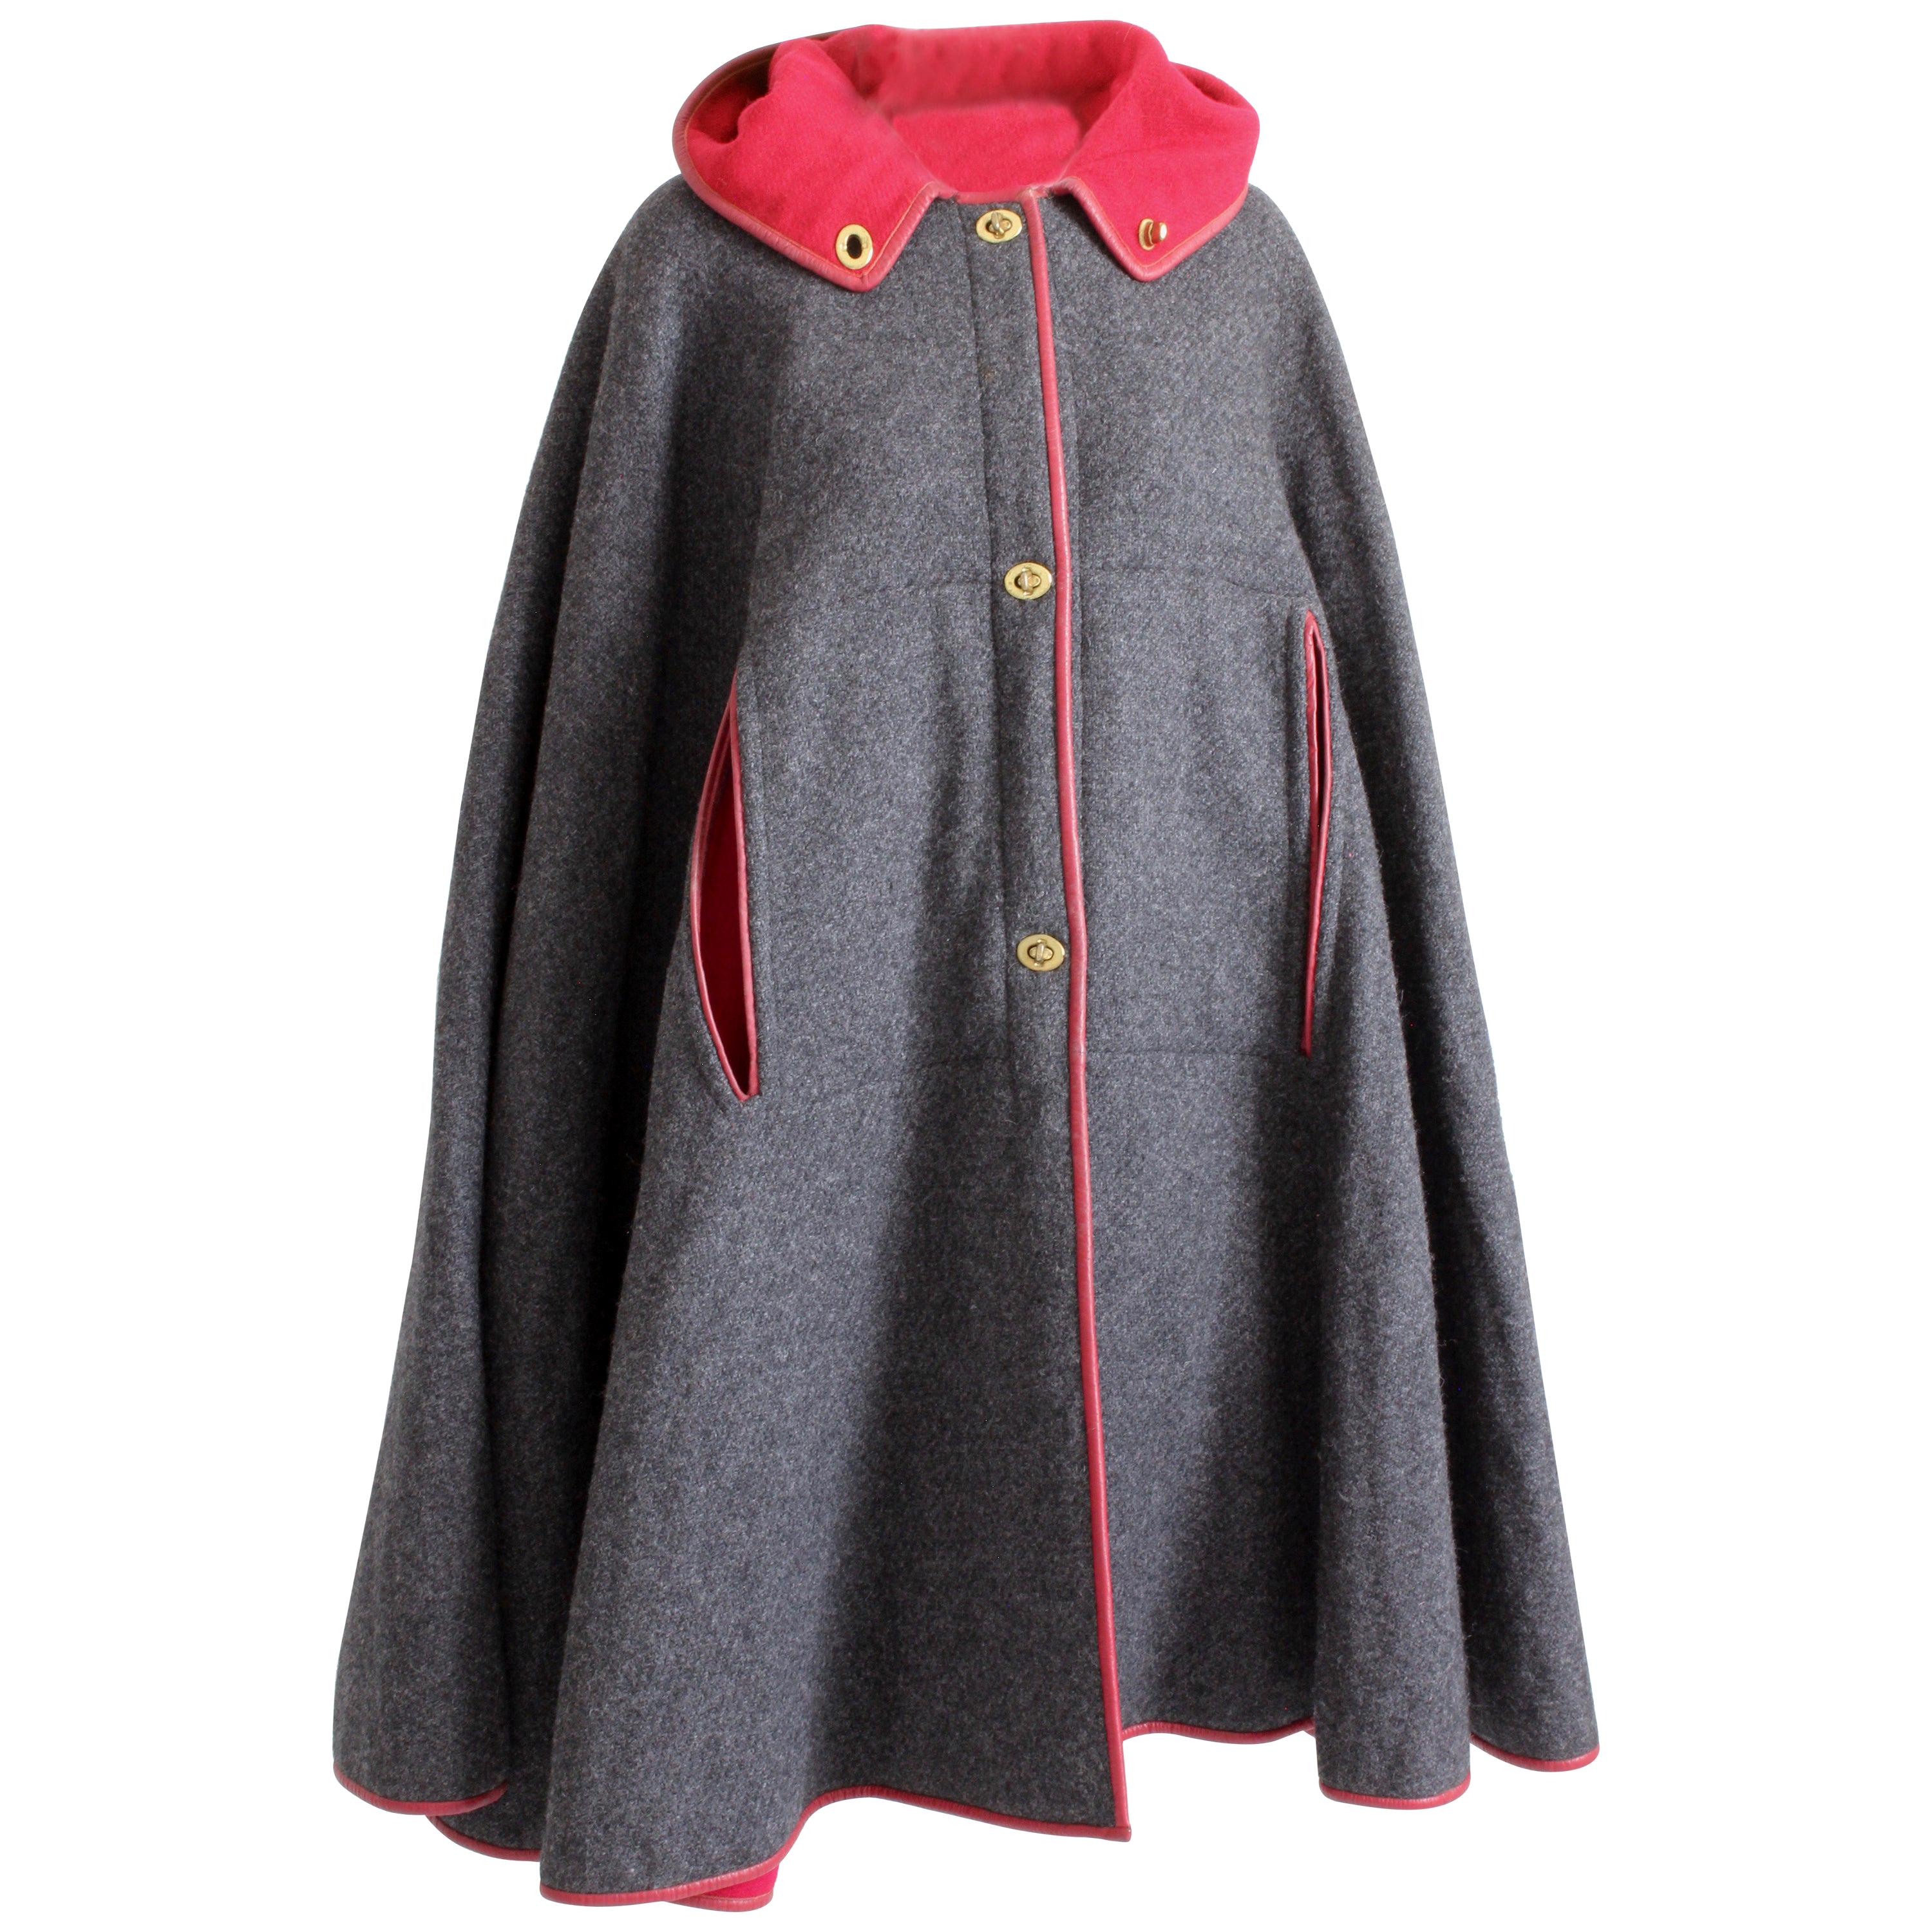 Bonnie Cashin Hooded Cape Charcoal Wool Red Leather Trim Rare Vintage OSFM